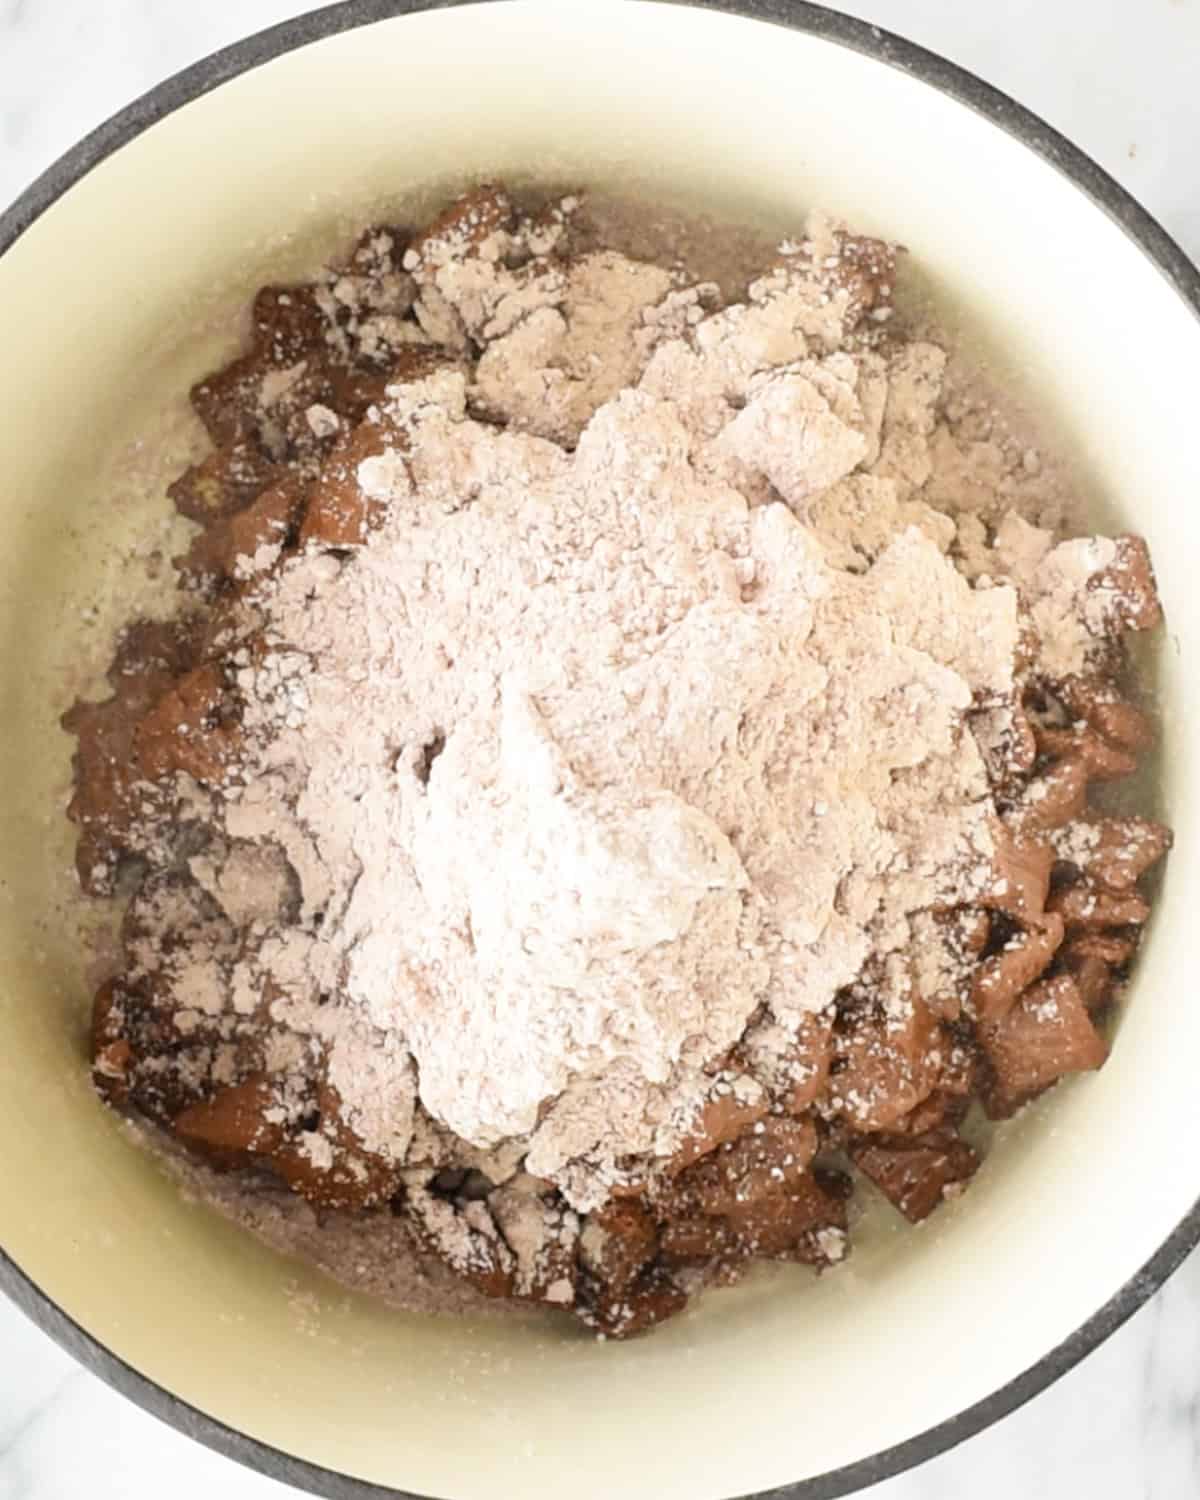 how to make dark chocolate puppy chow - adding powdered sugar & cocoa powder to slightly chilled chocolate coated cereal